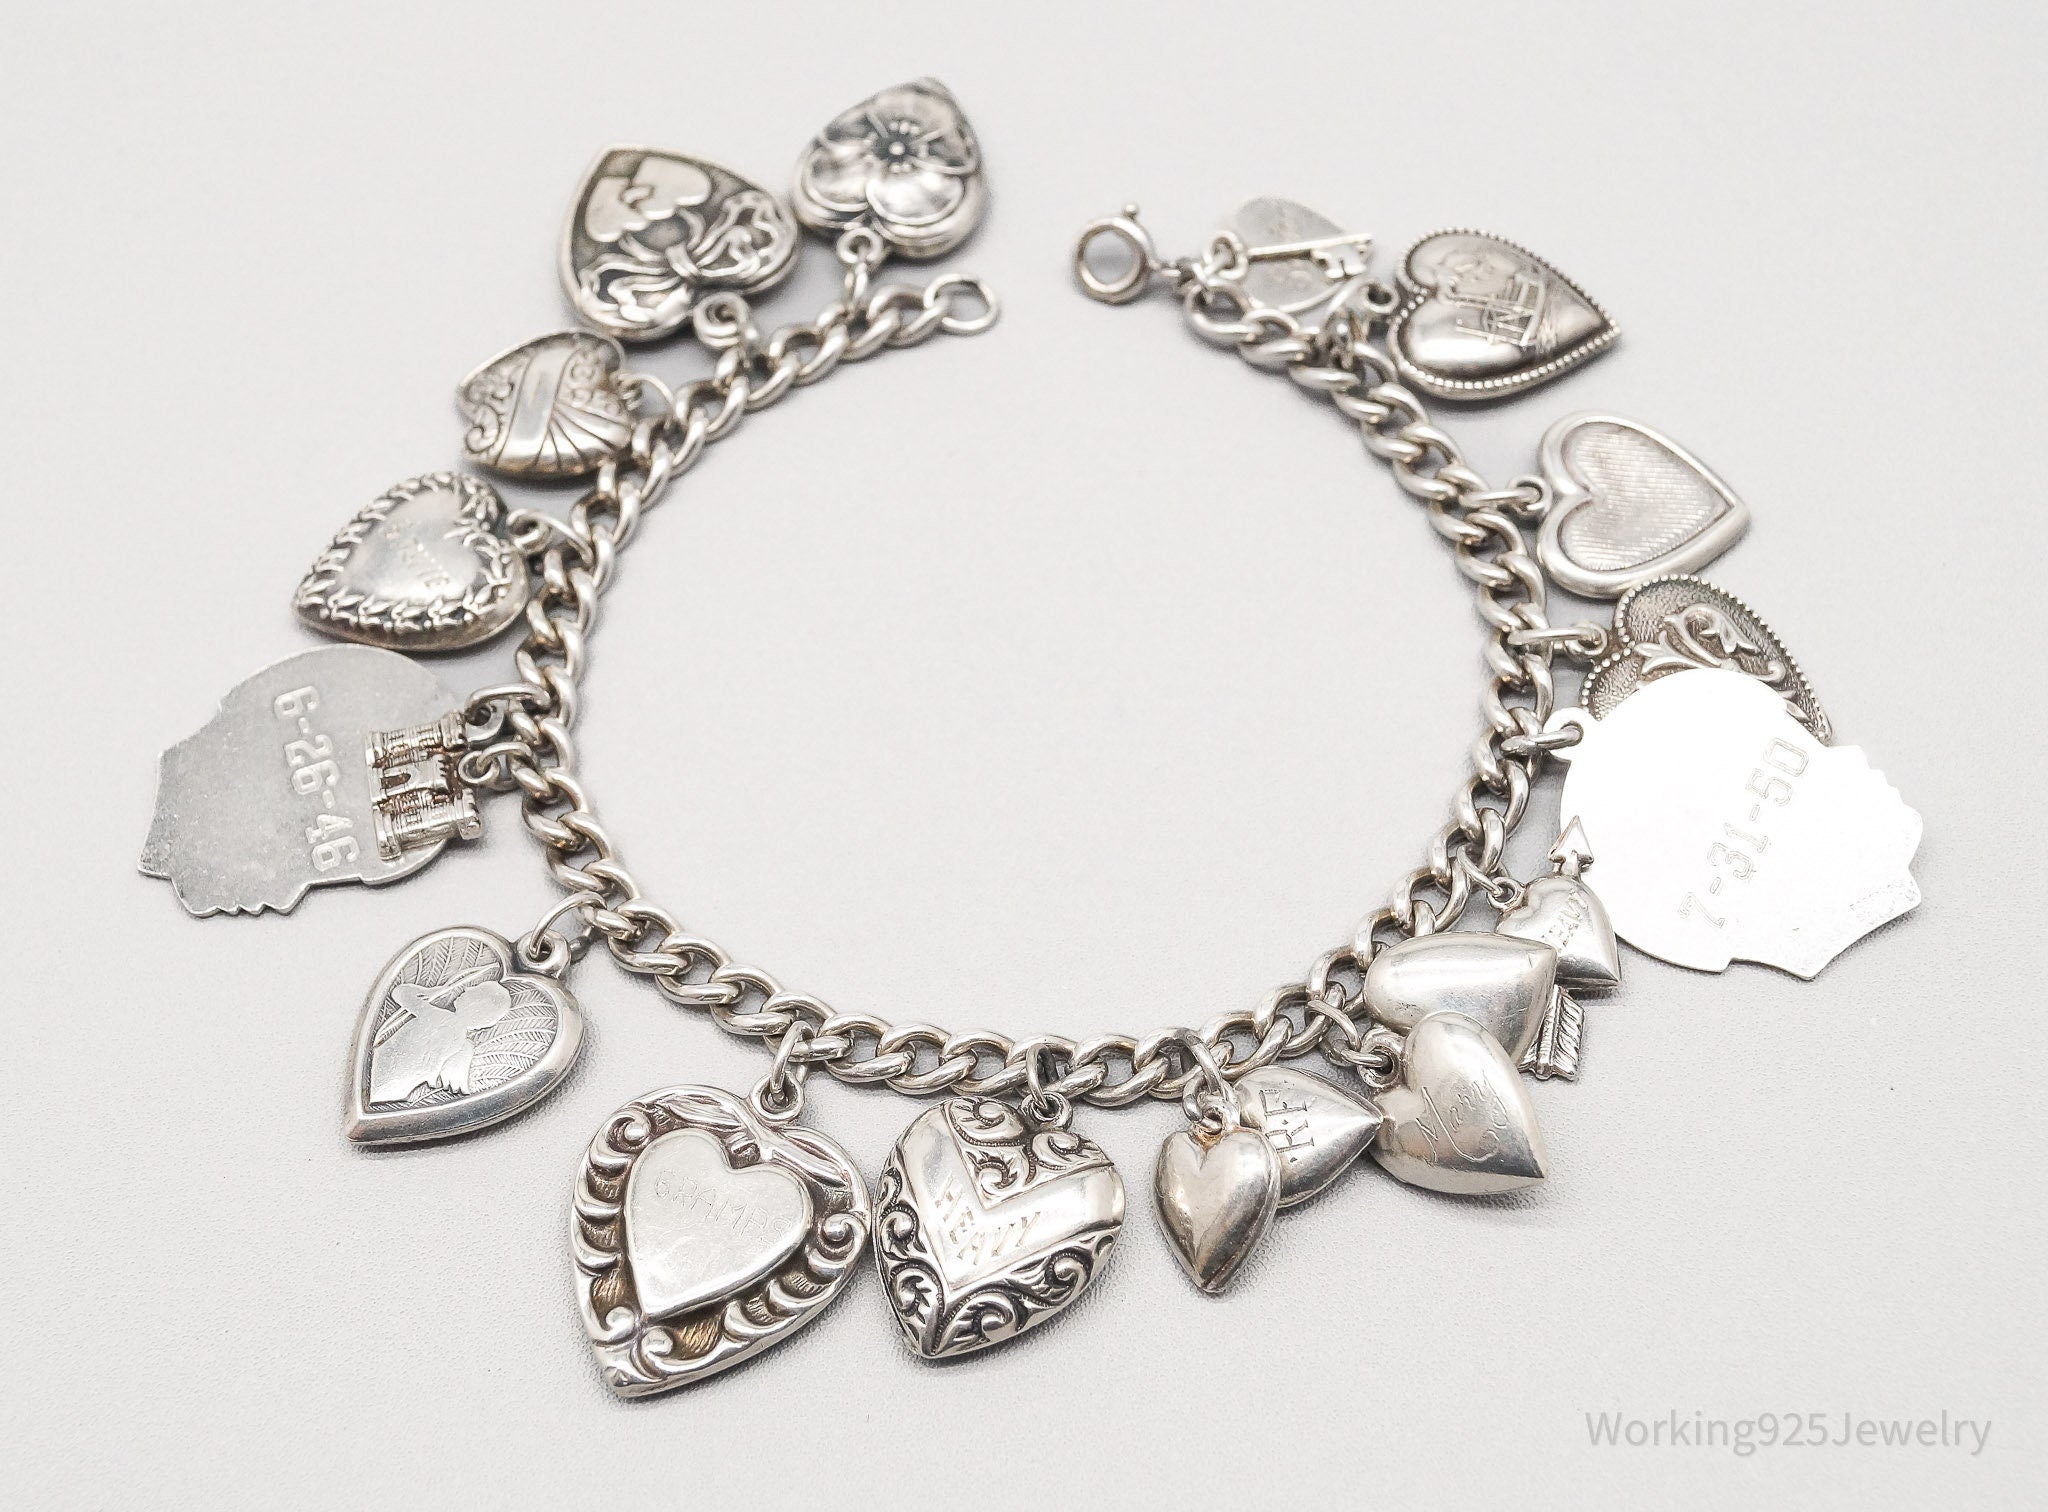 Antique Vintage Puffy Hearts Charms Sterling Silver Charm Bracelet